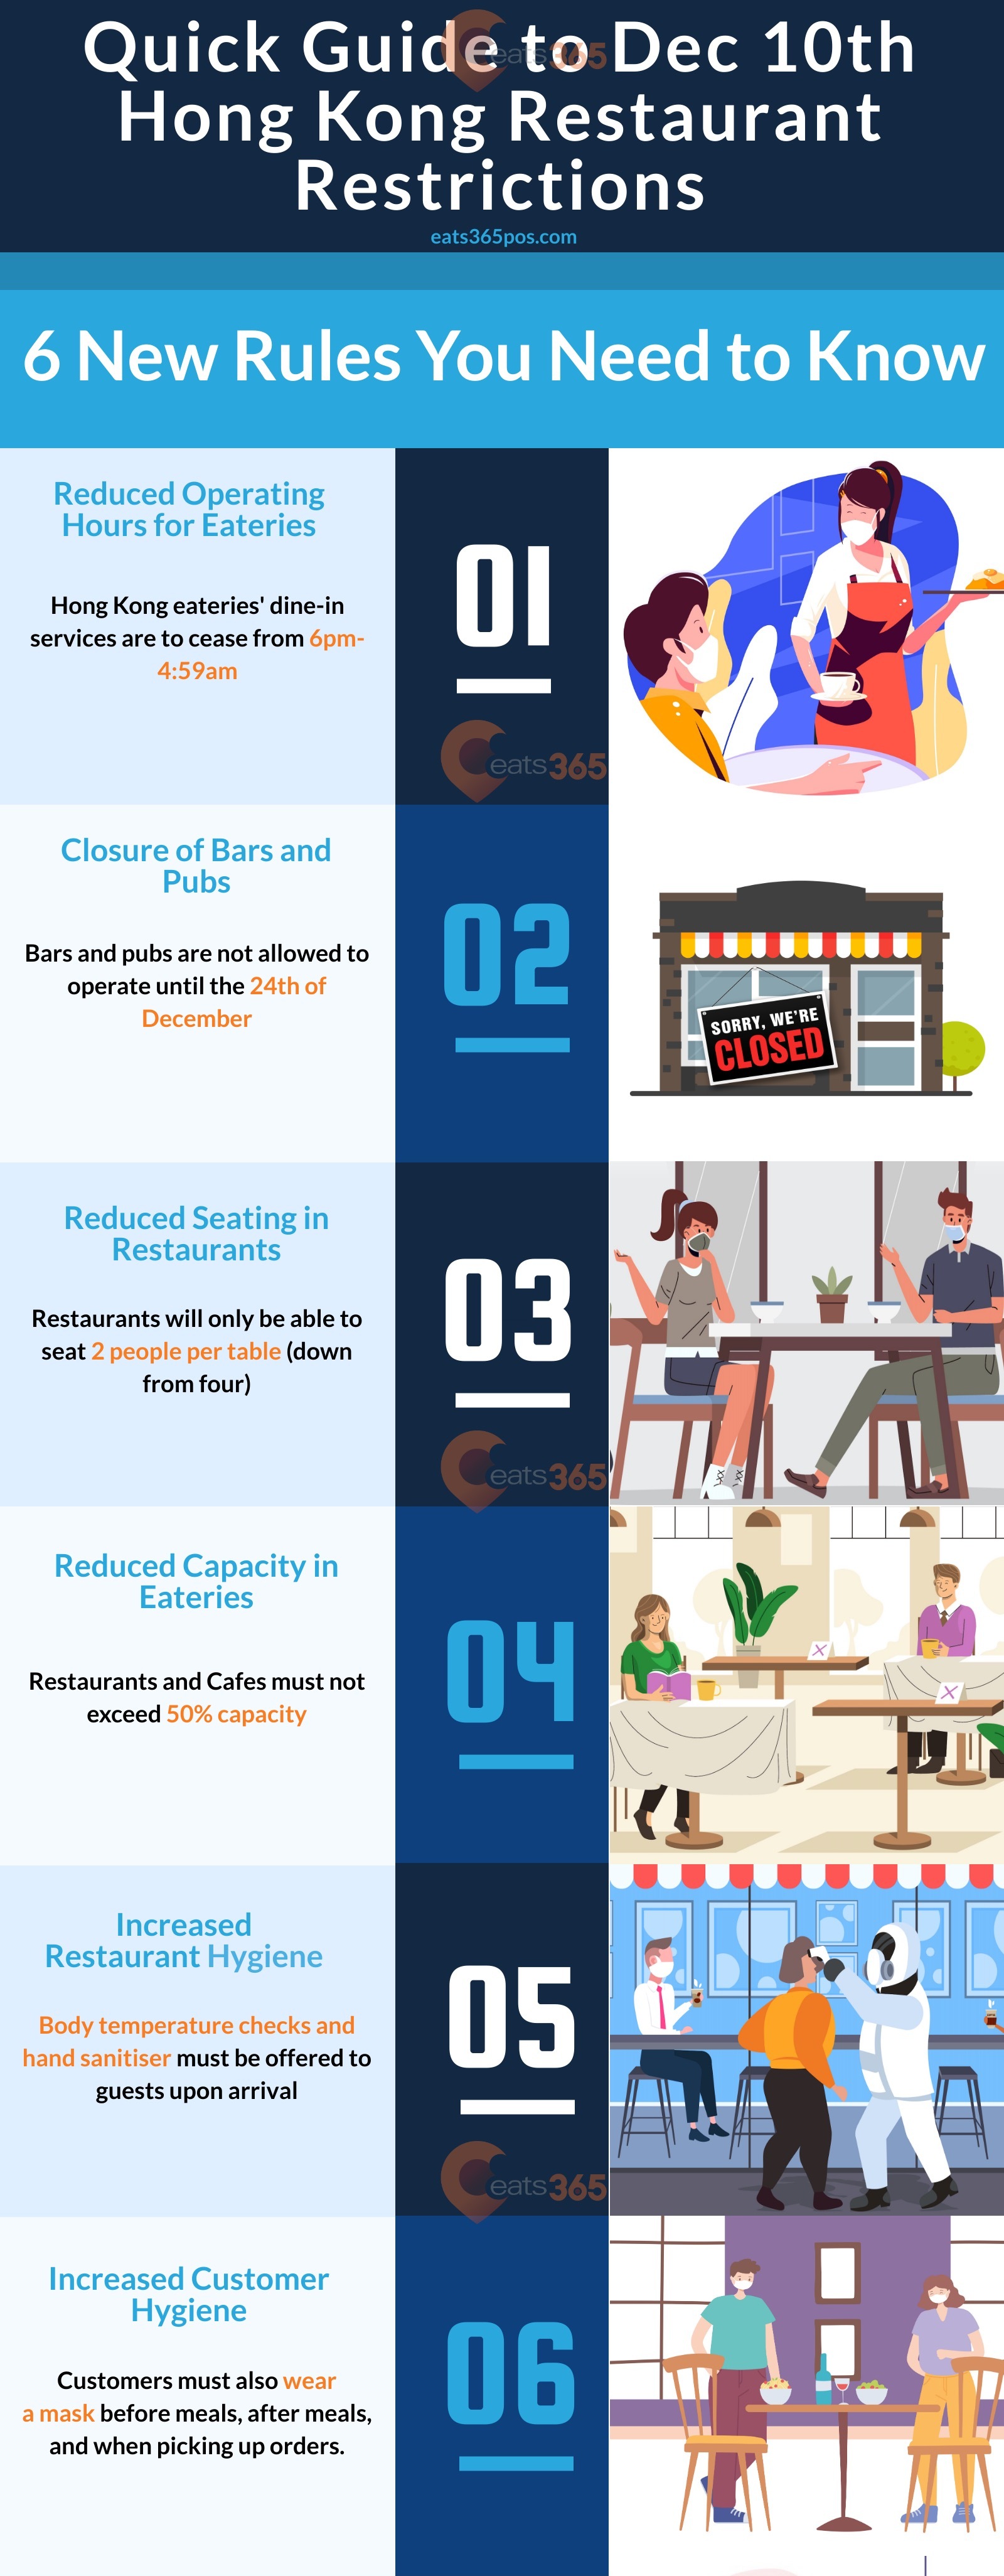 Eats365 free infoGRAPHIC Hong Kong COVID new government restaurant restrictions